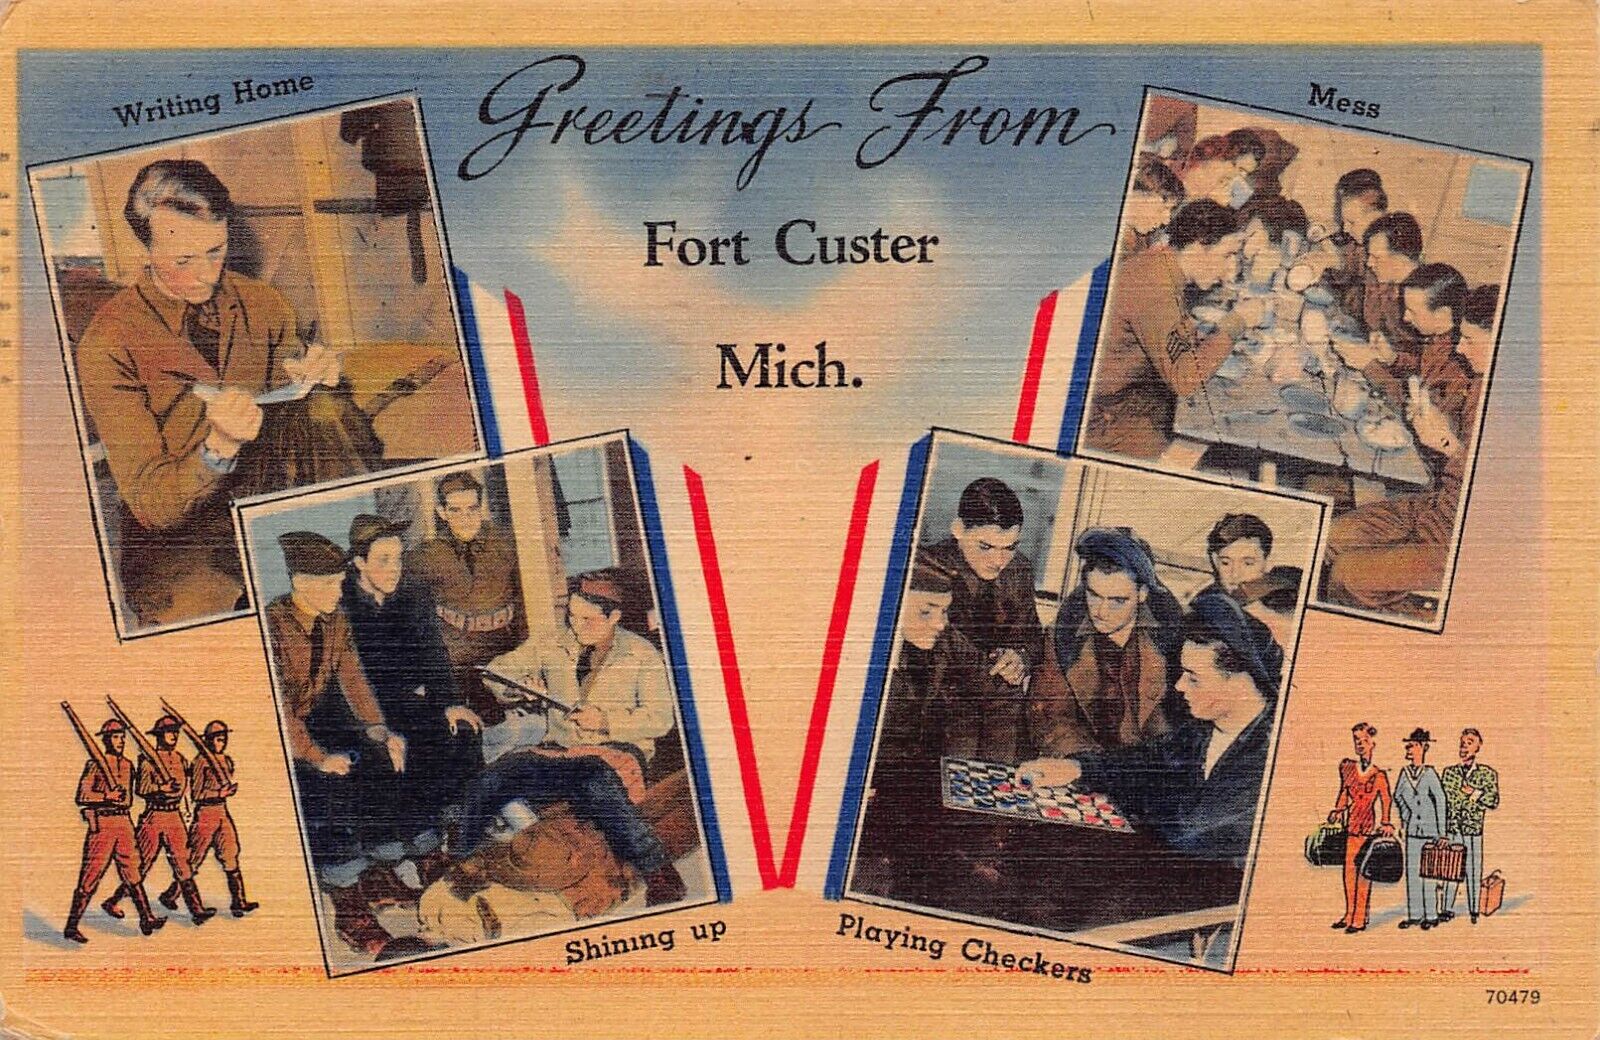 1942 Fort Custer Michigan MI Greetings From Larger Not Large Letter 70479 PC